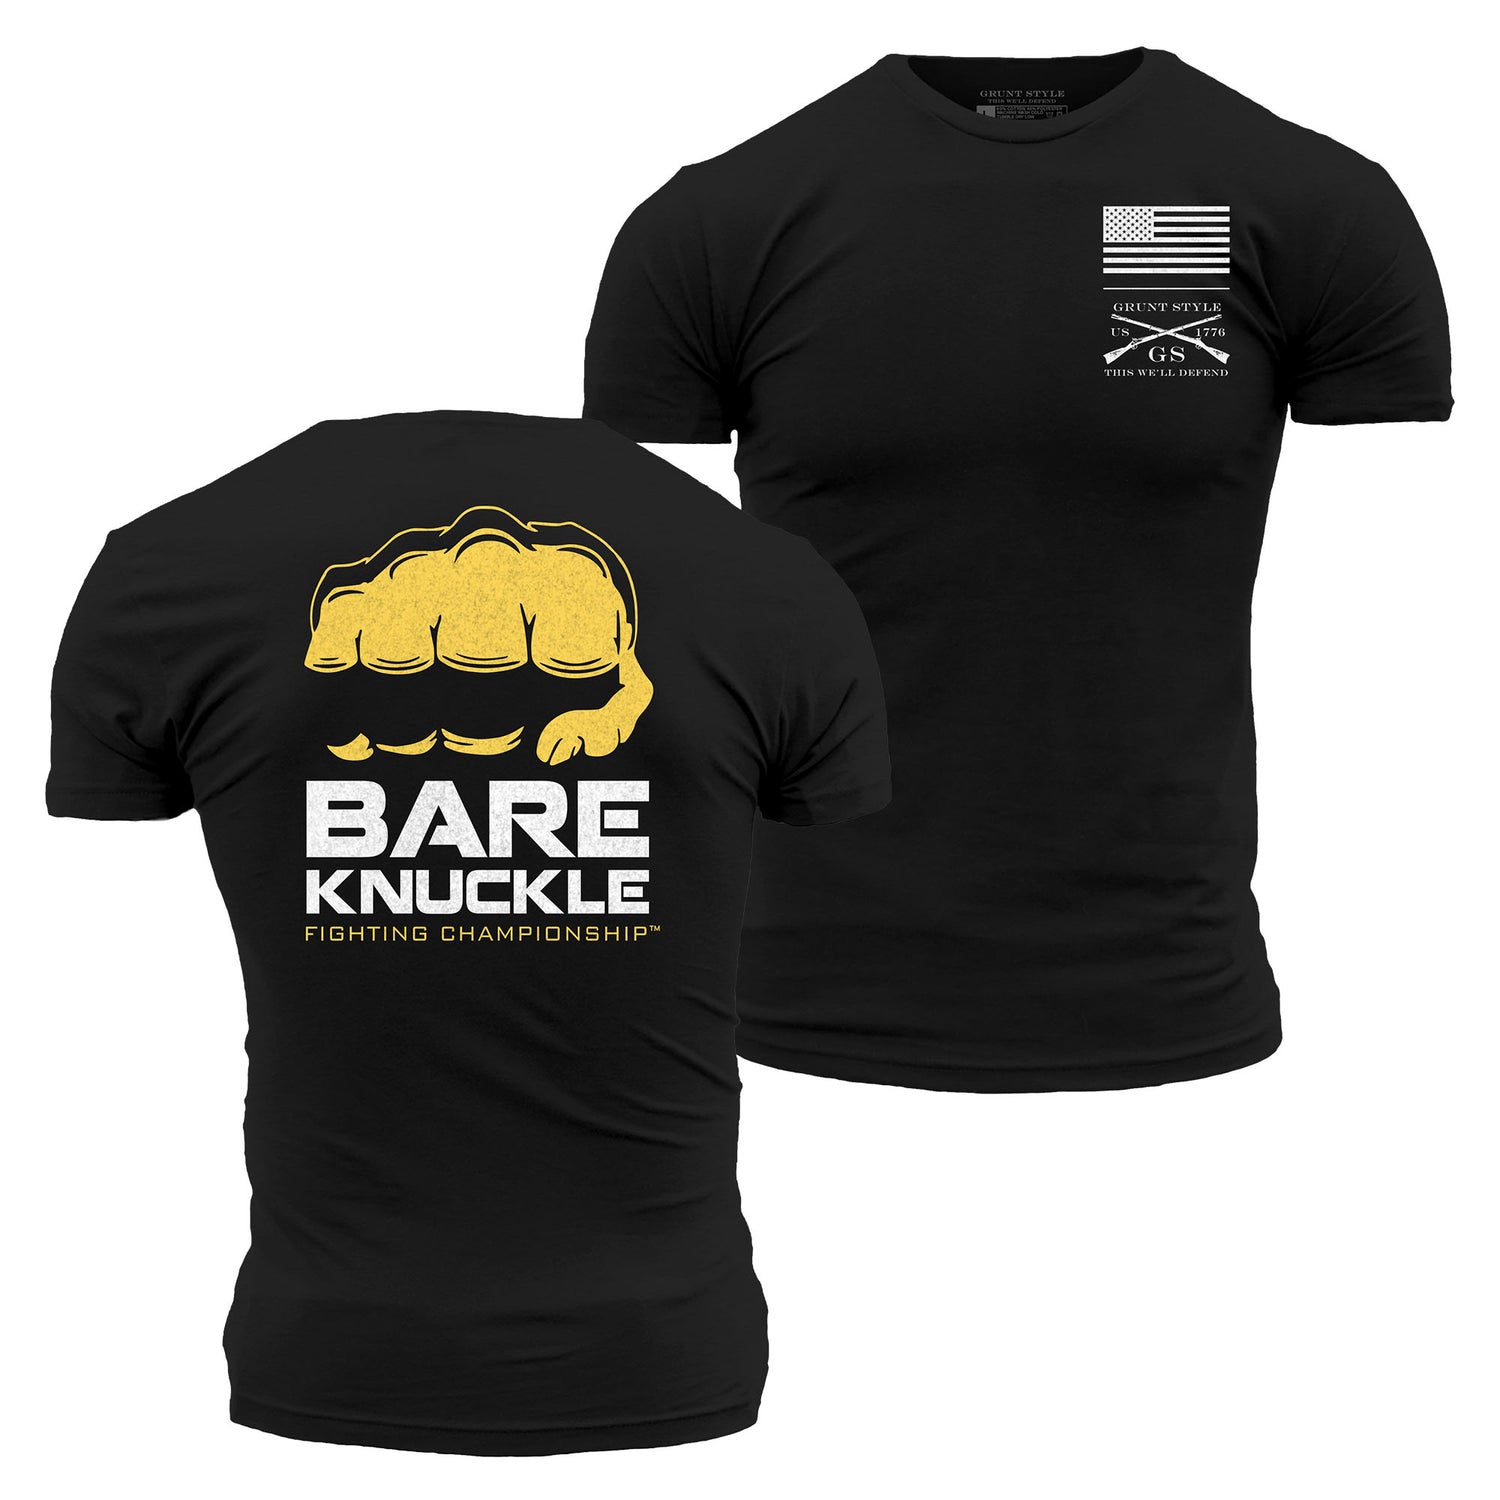 Bare Knuckle Fighting Championship Shirts 